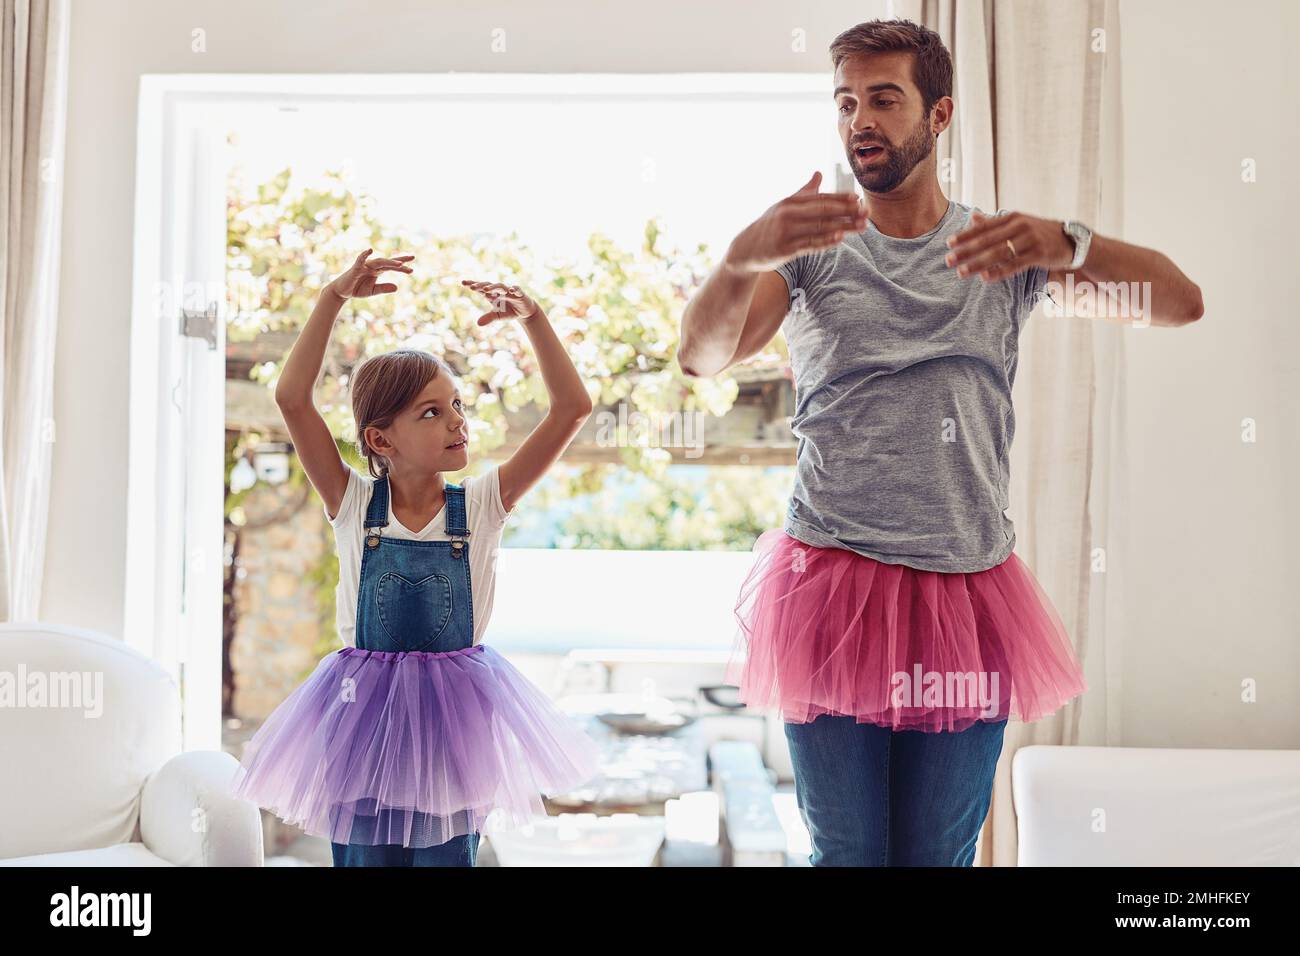 Oh, its all about the arms, I see...a father and daughter dancing in their tutus. Stock Photo